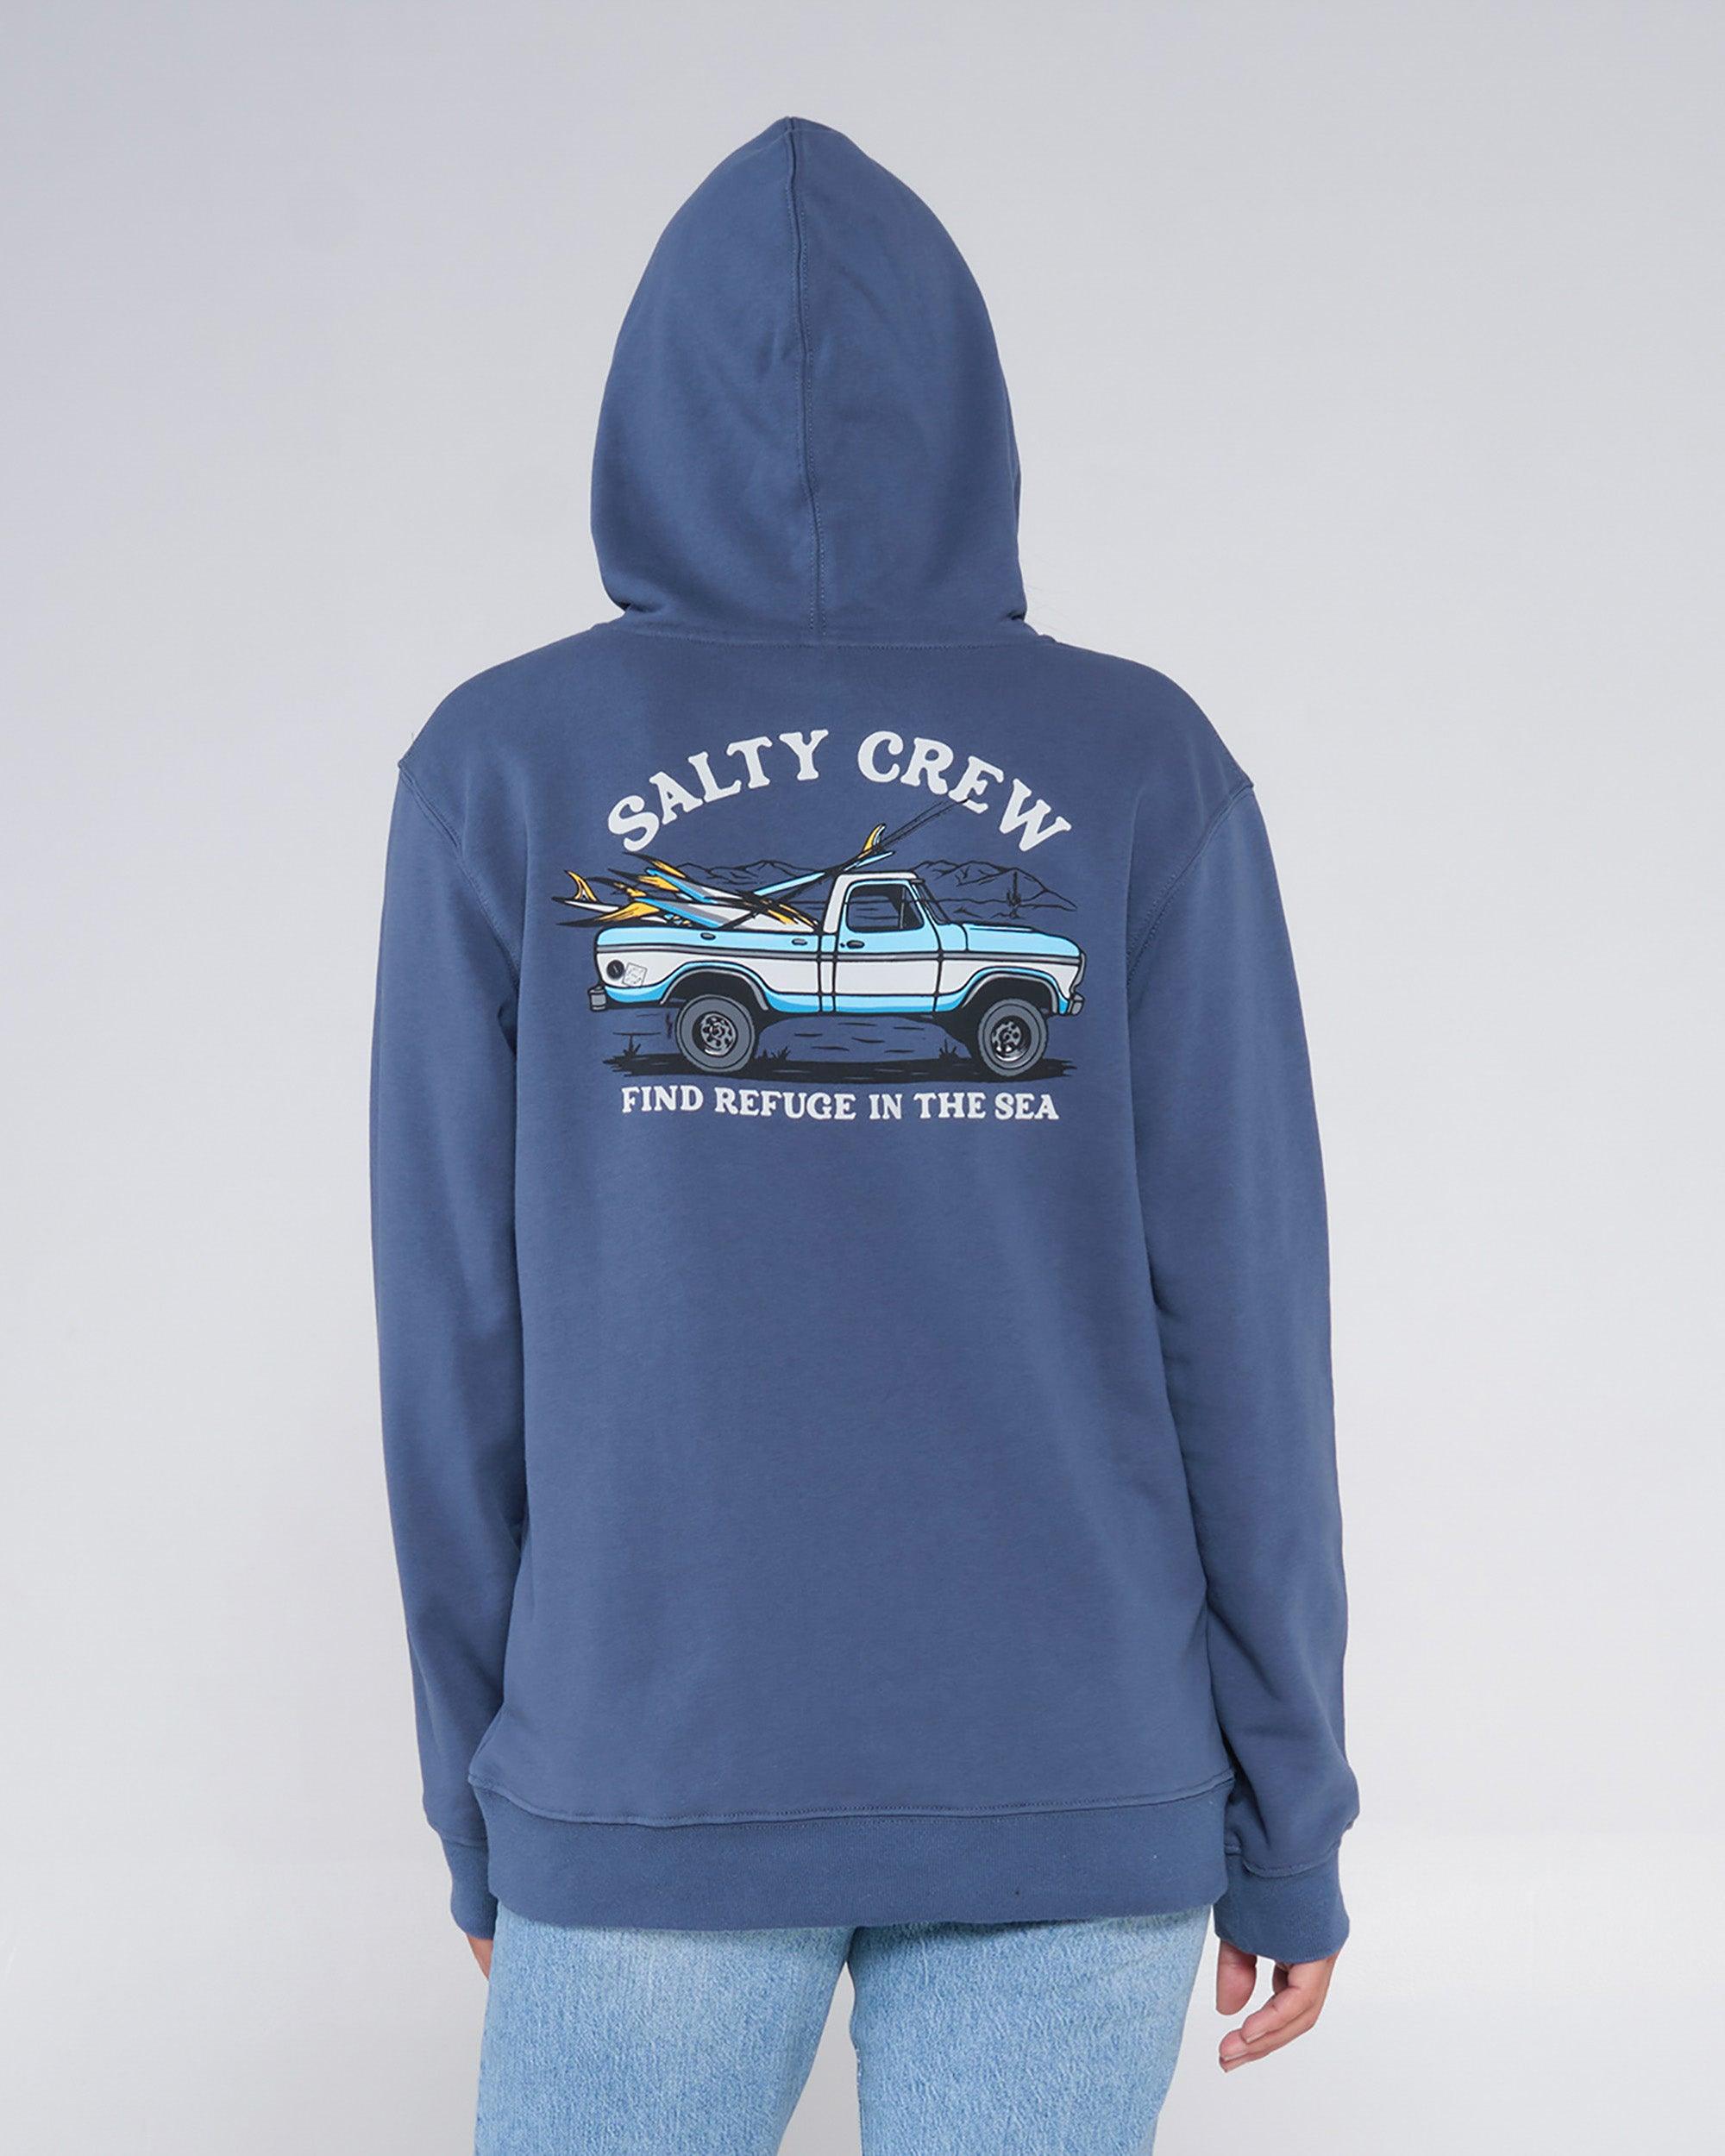 Baja Days Blue Steel Hoody - Purpose-Built / Home of the Trades